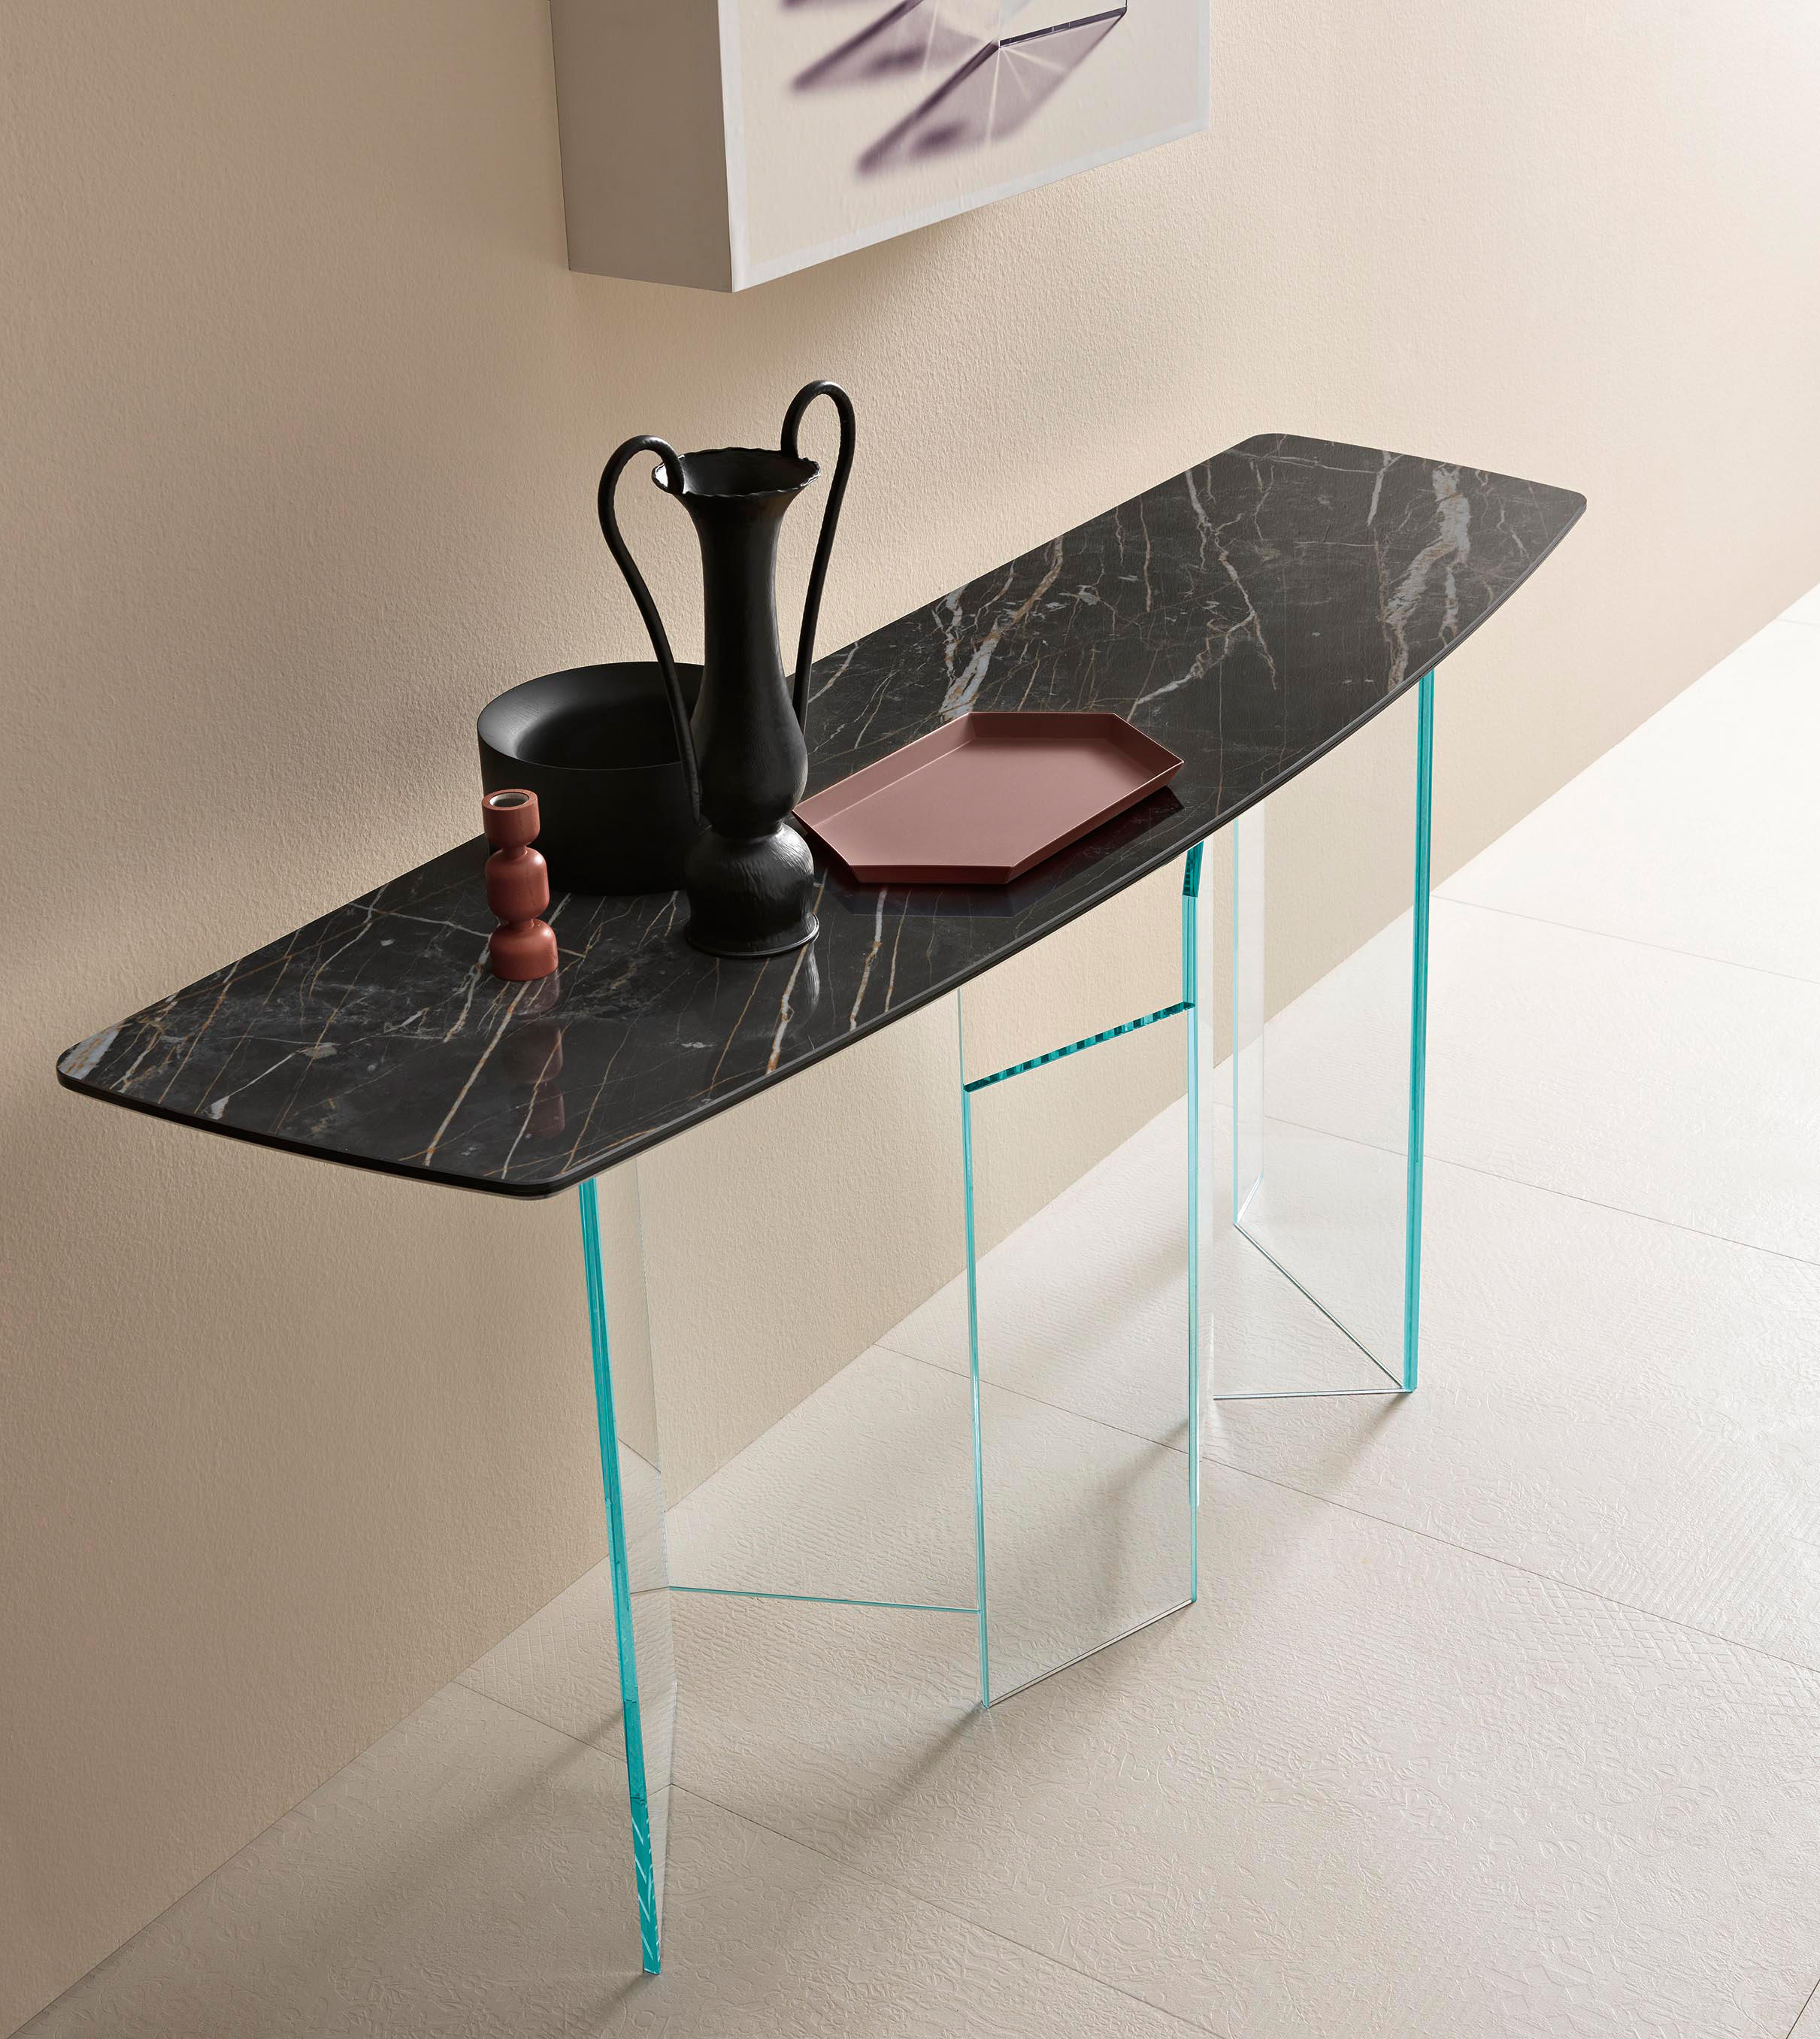 Metropolis Table Collection by Giuseppe Maurizio Scutellà for Tonelli